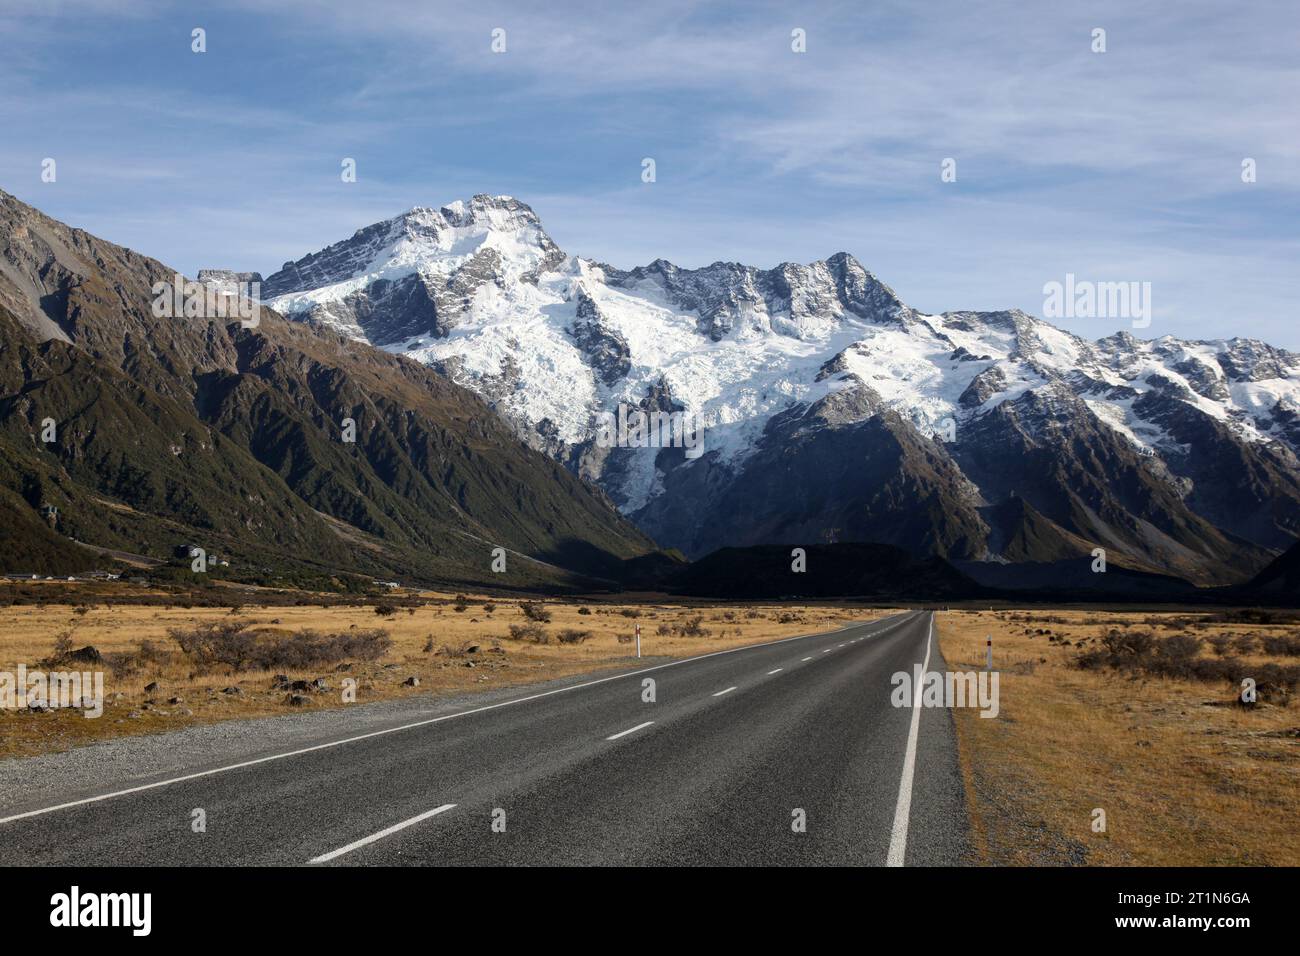 The New Zealand Southern Alps from Mount Cook road. From left to right in the image you can see Mt Sefton, Huddlestone Glacier, Stocking Glacier and t Stock Photo